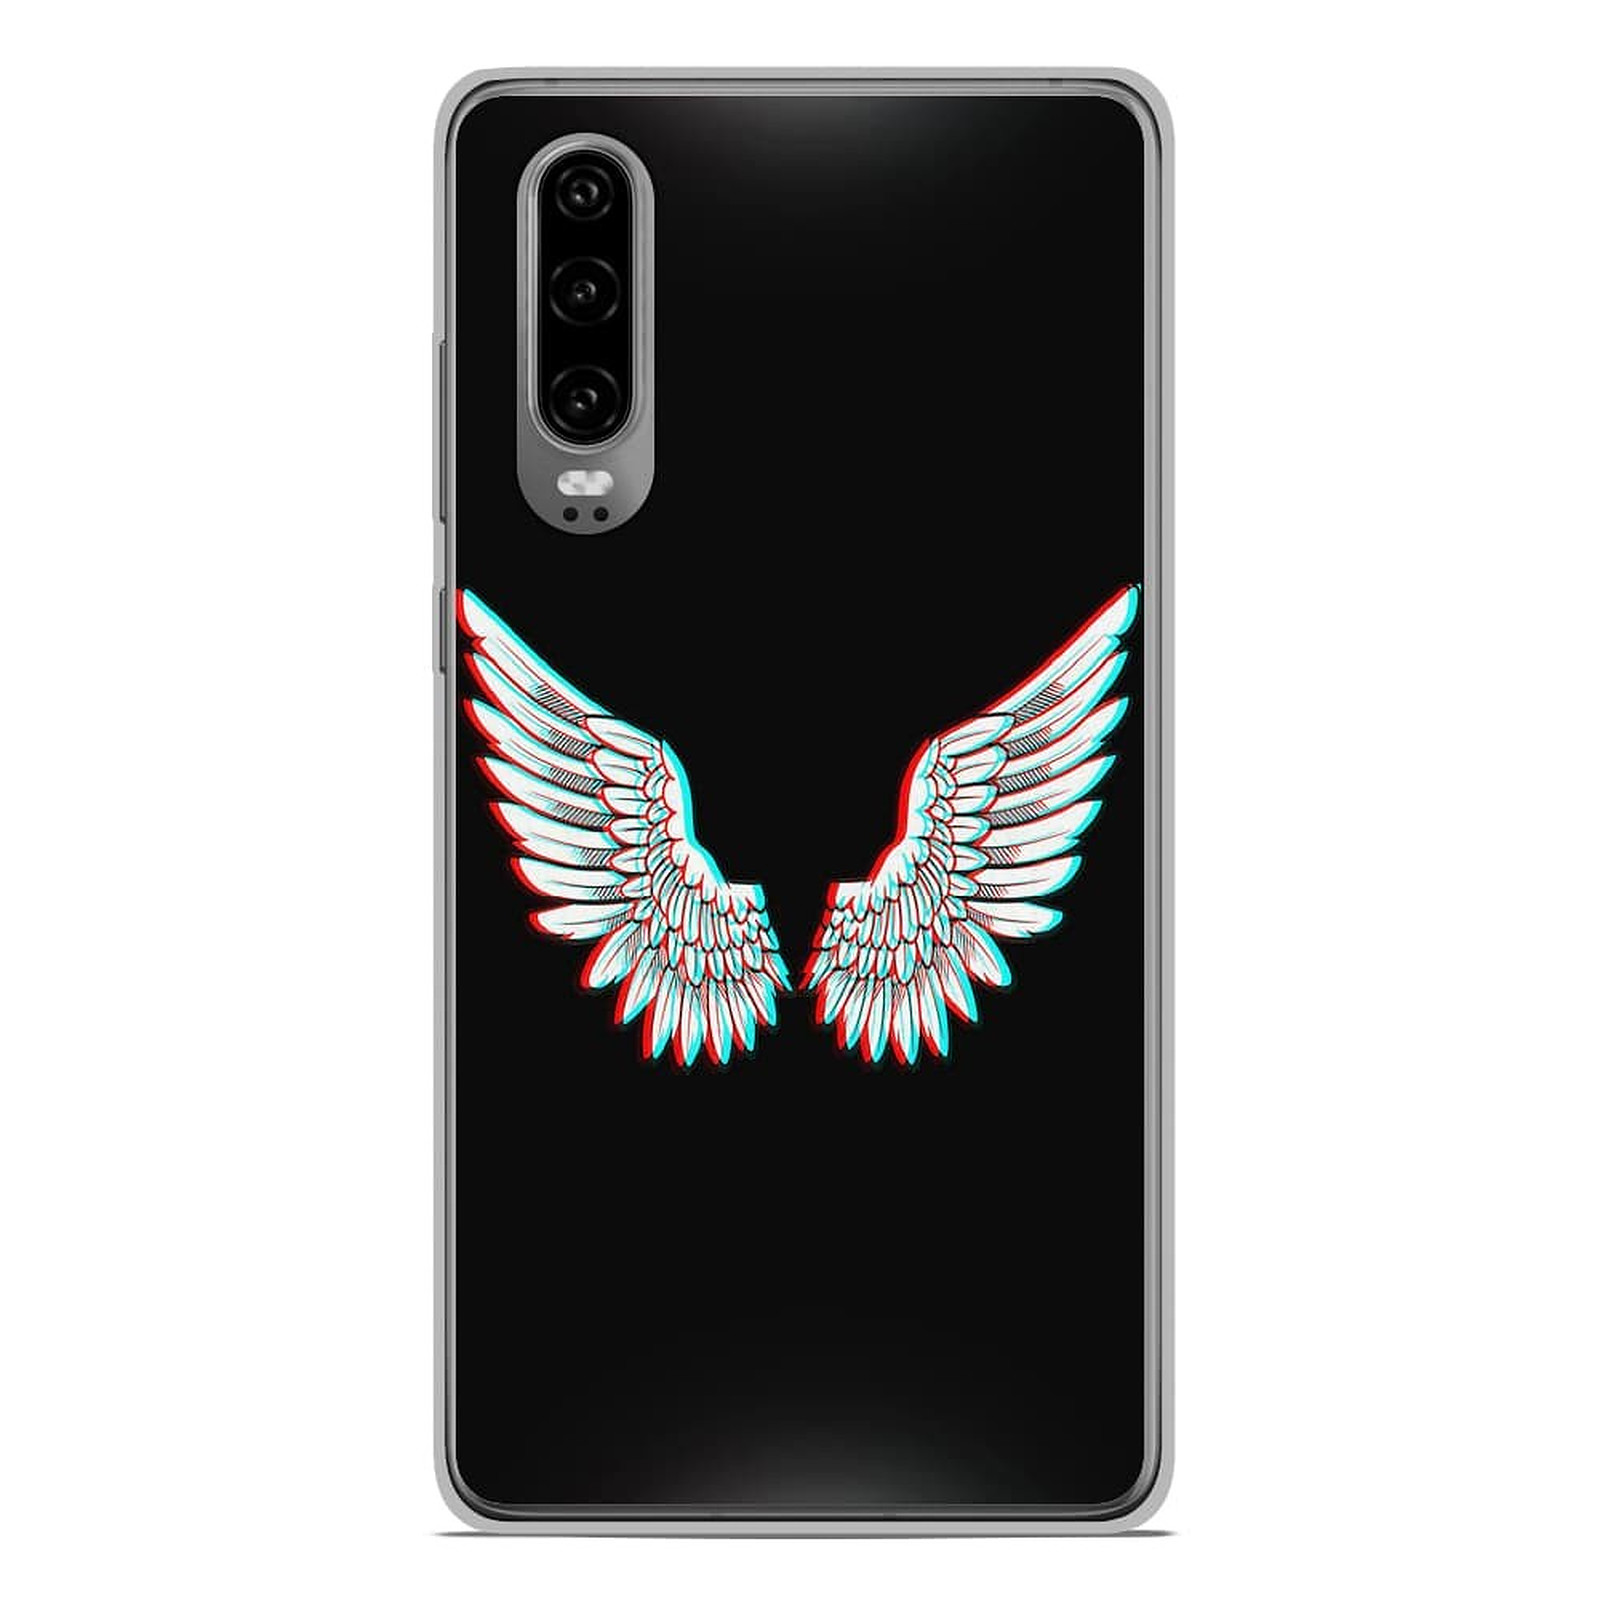 1001 Coques Coque silicone gel Huawei P30 motif Ailes d'Ange - Coque telephone 1001Coques